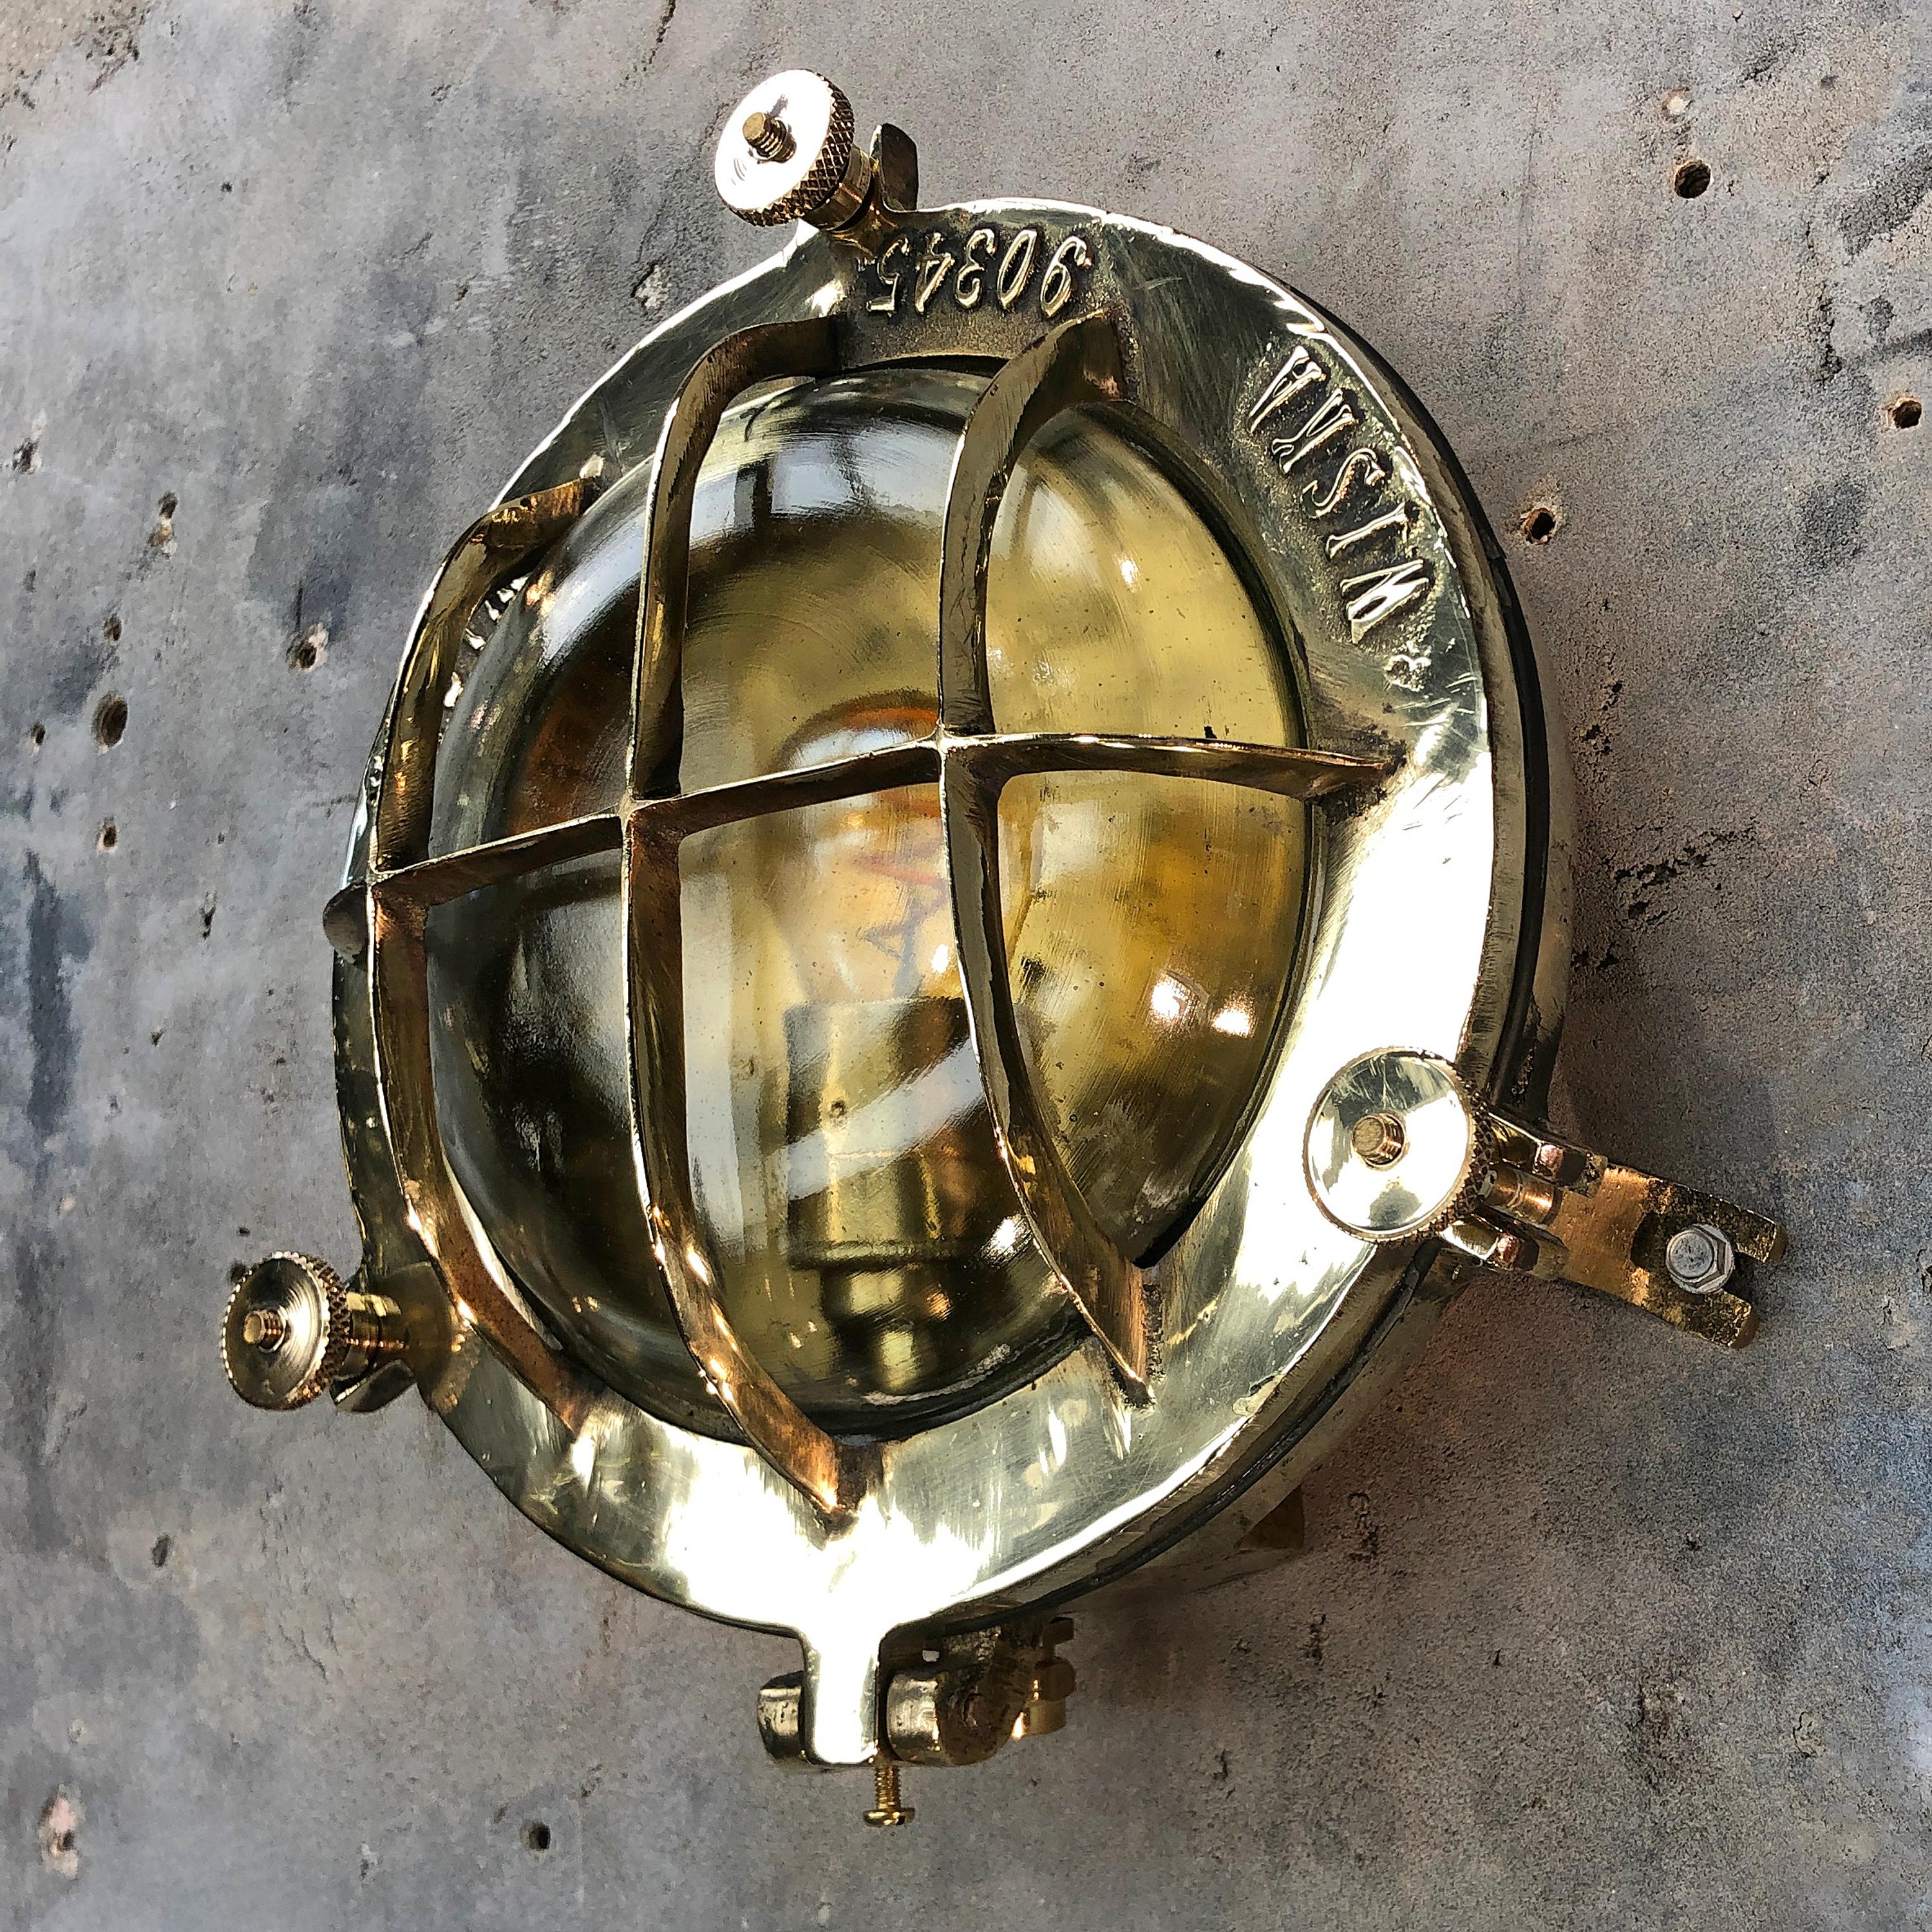 A reclaimed 1970s retro industrial circular brass bulkhead wall lighting by Wiska. 

Originally a marine lighting fixture made for super tankers and cargo ships. 

Professionally restored by Loomlight in the UK for use in modern interiors and